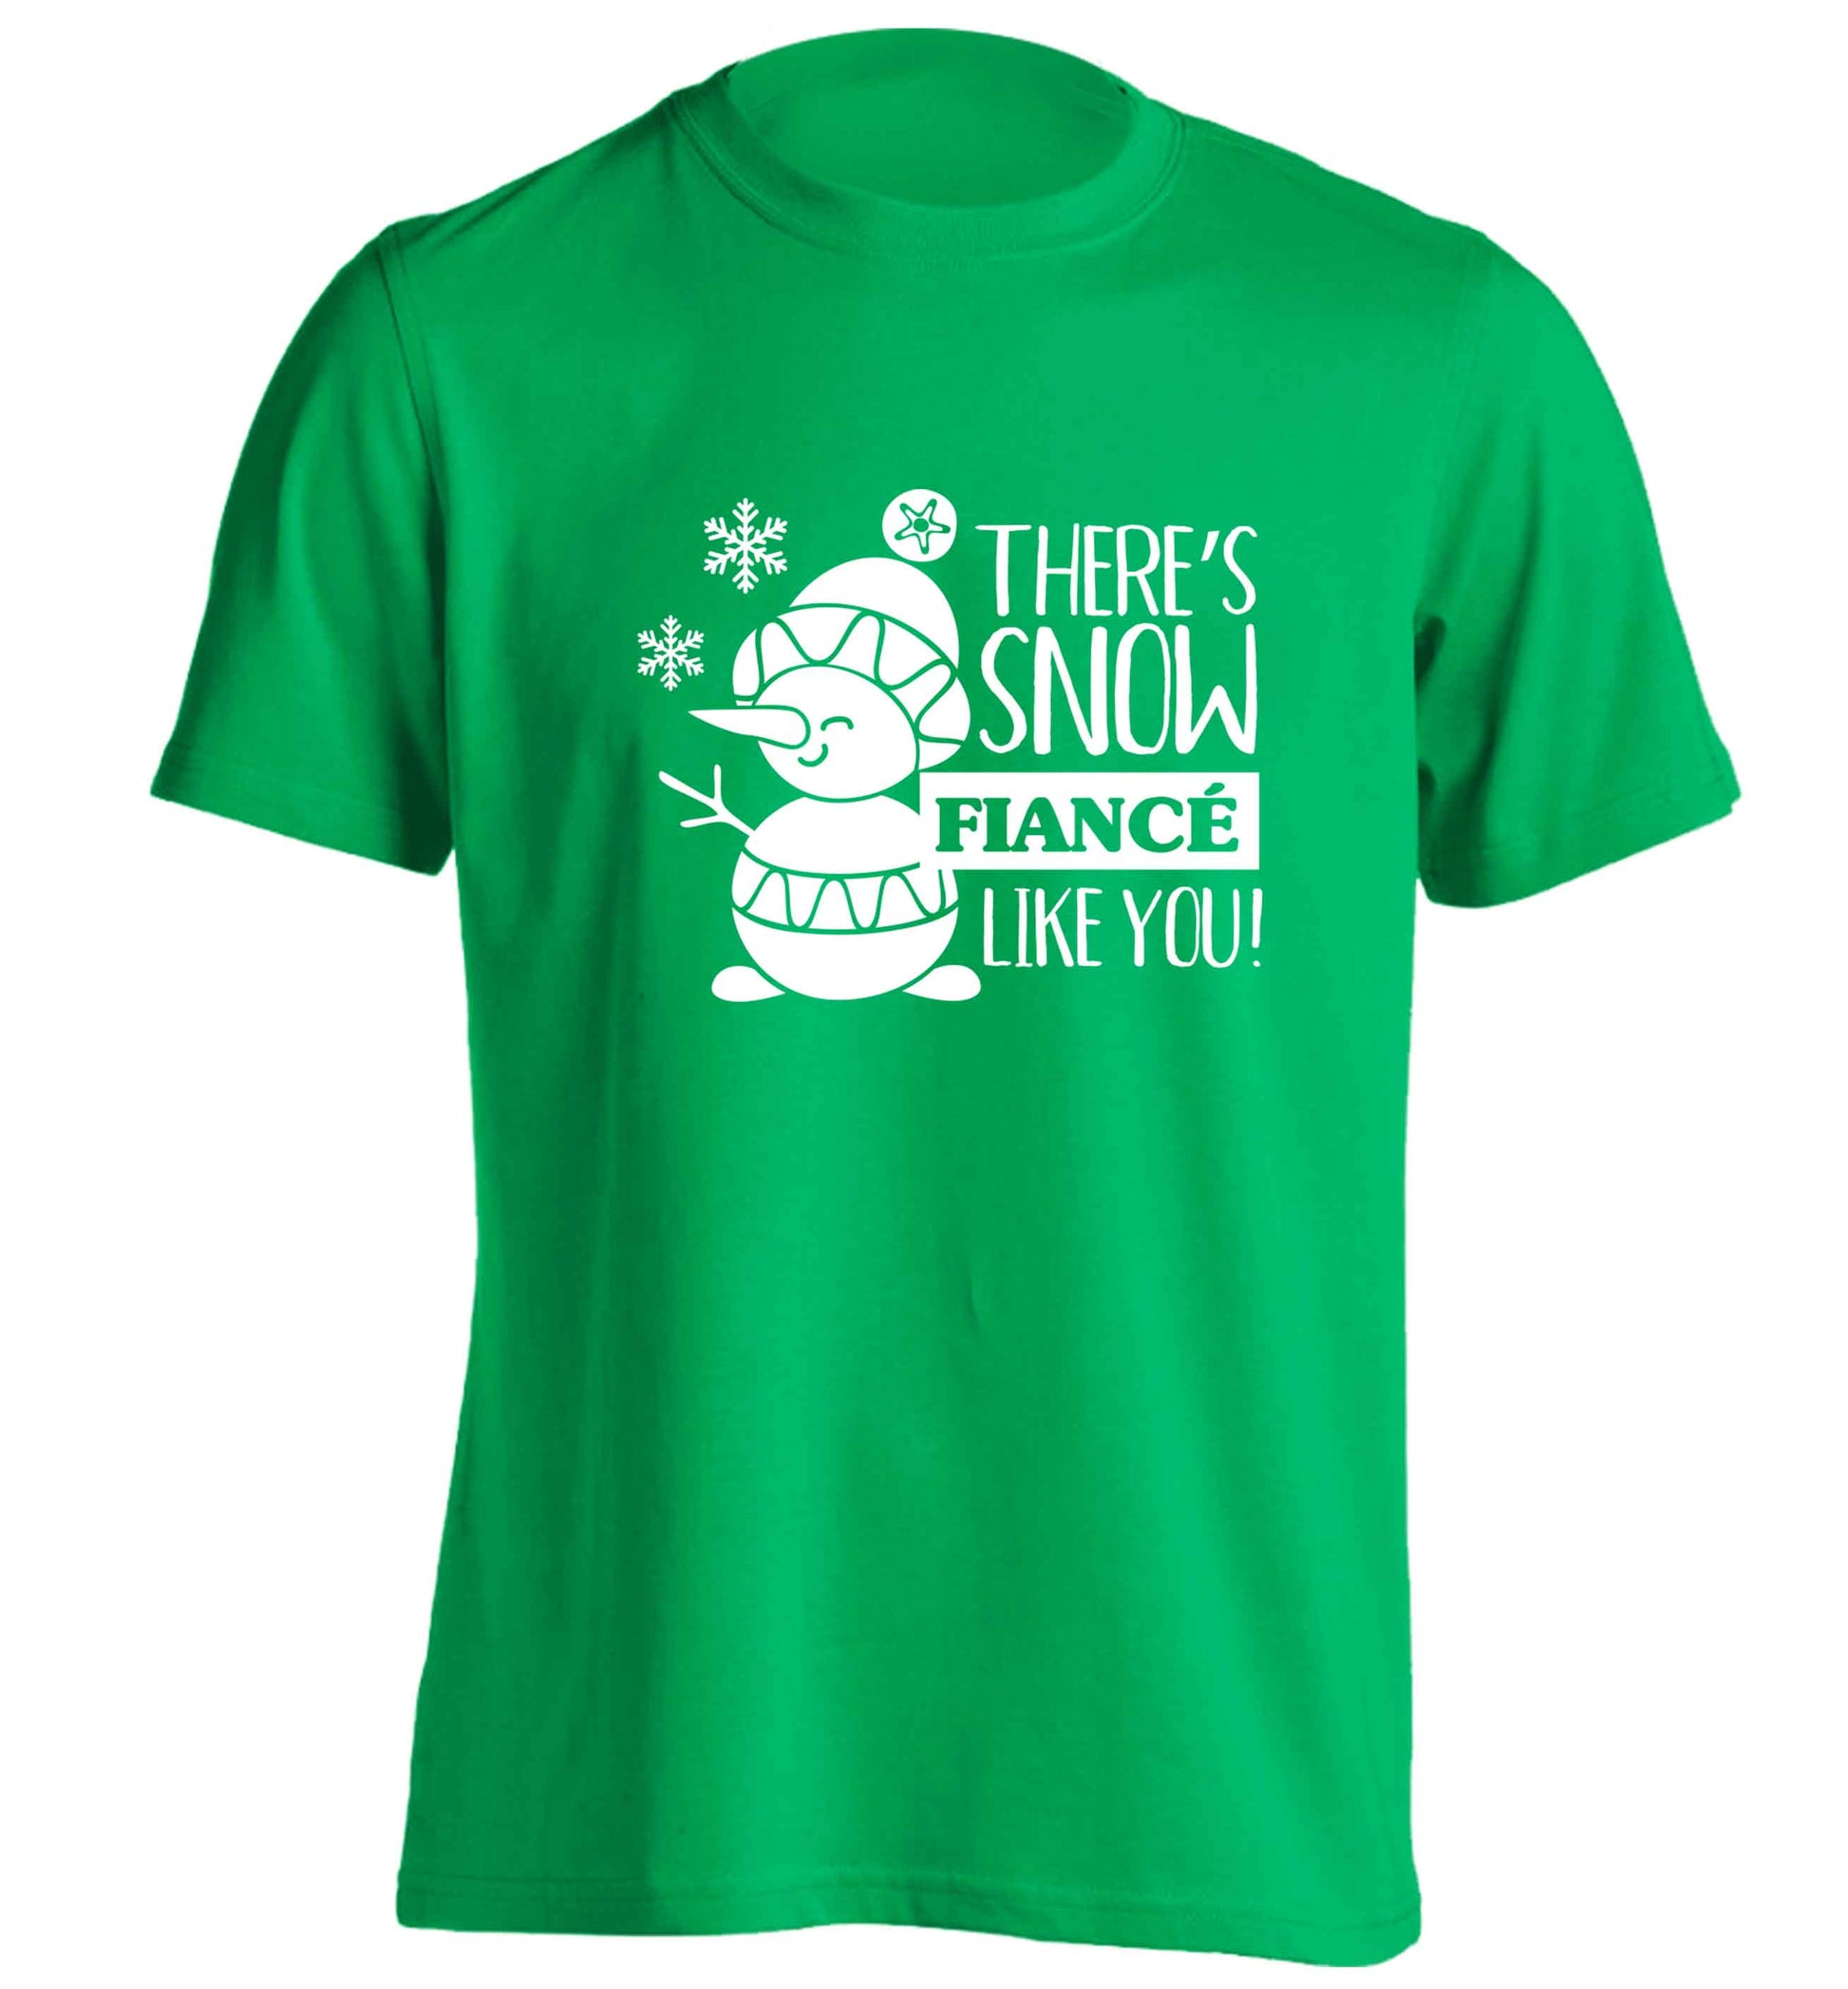 There's snow fiance like you adults unisex green Tshirt 2XL